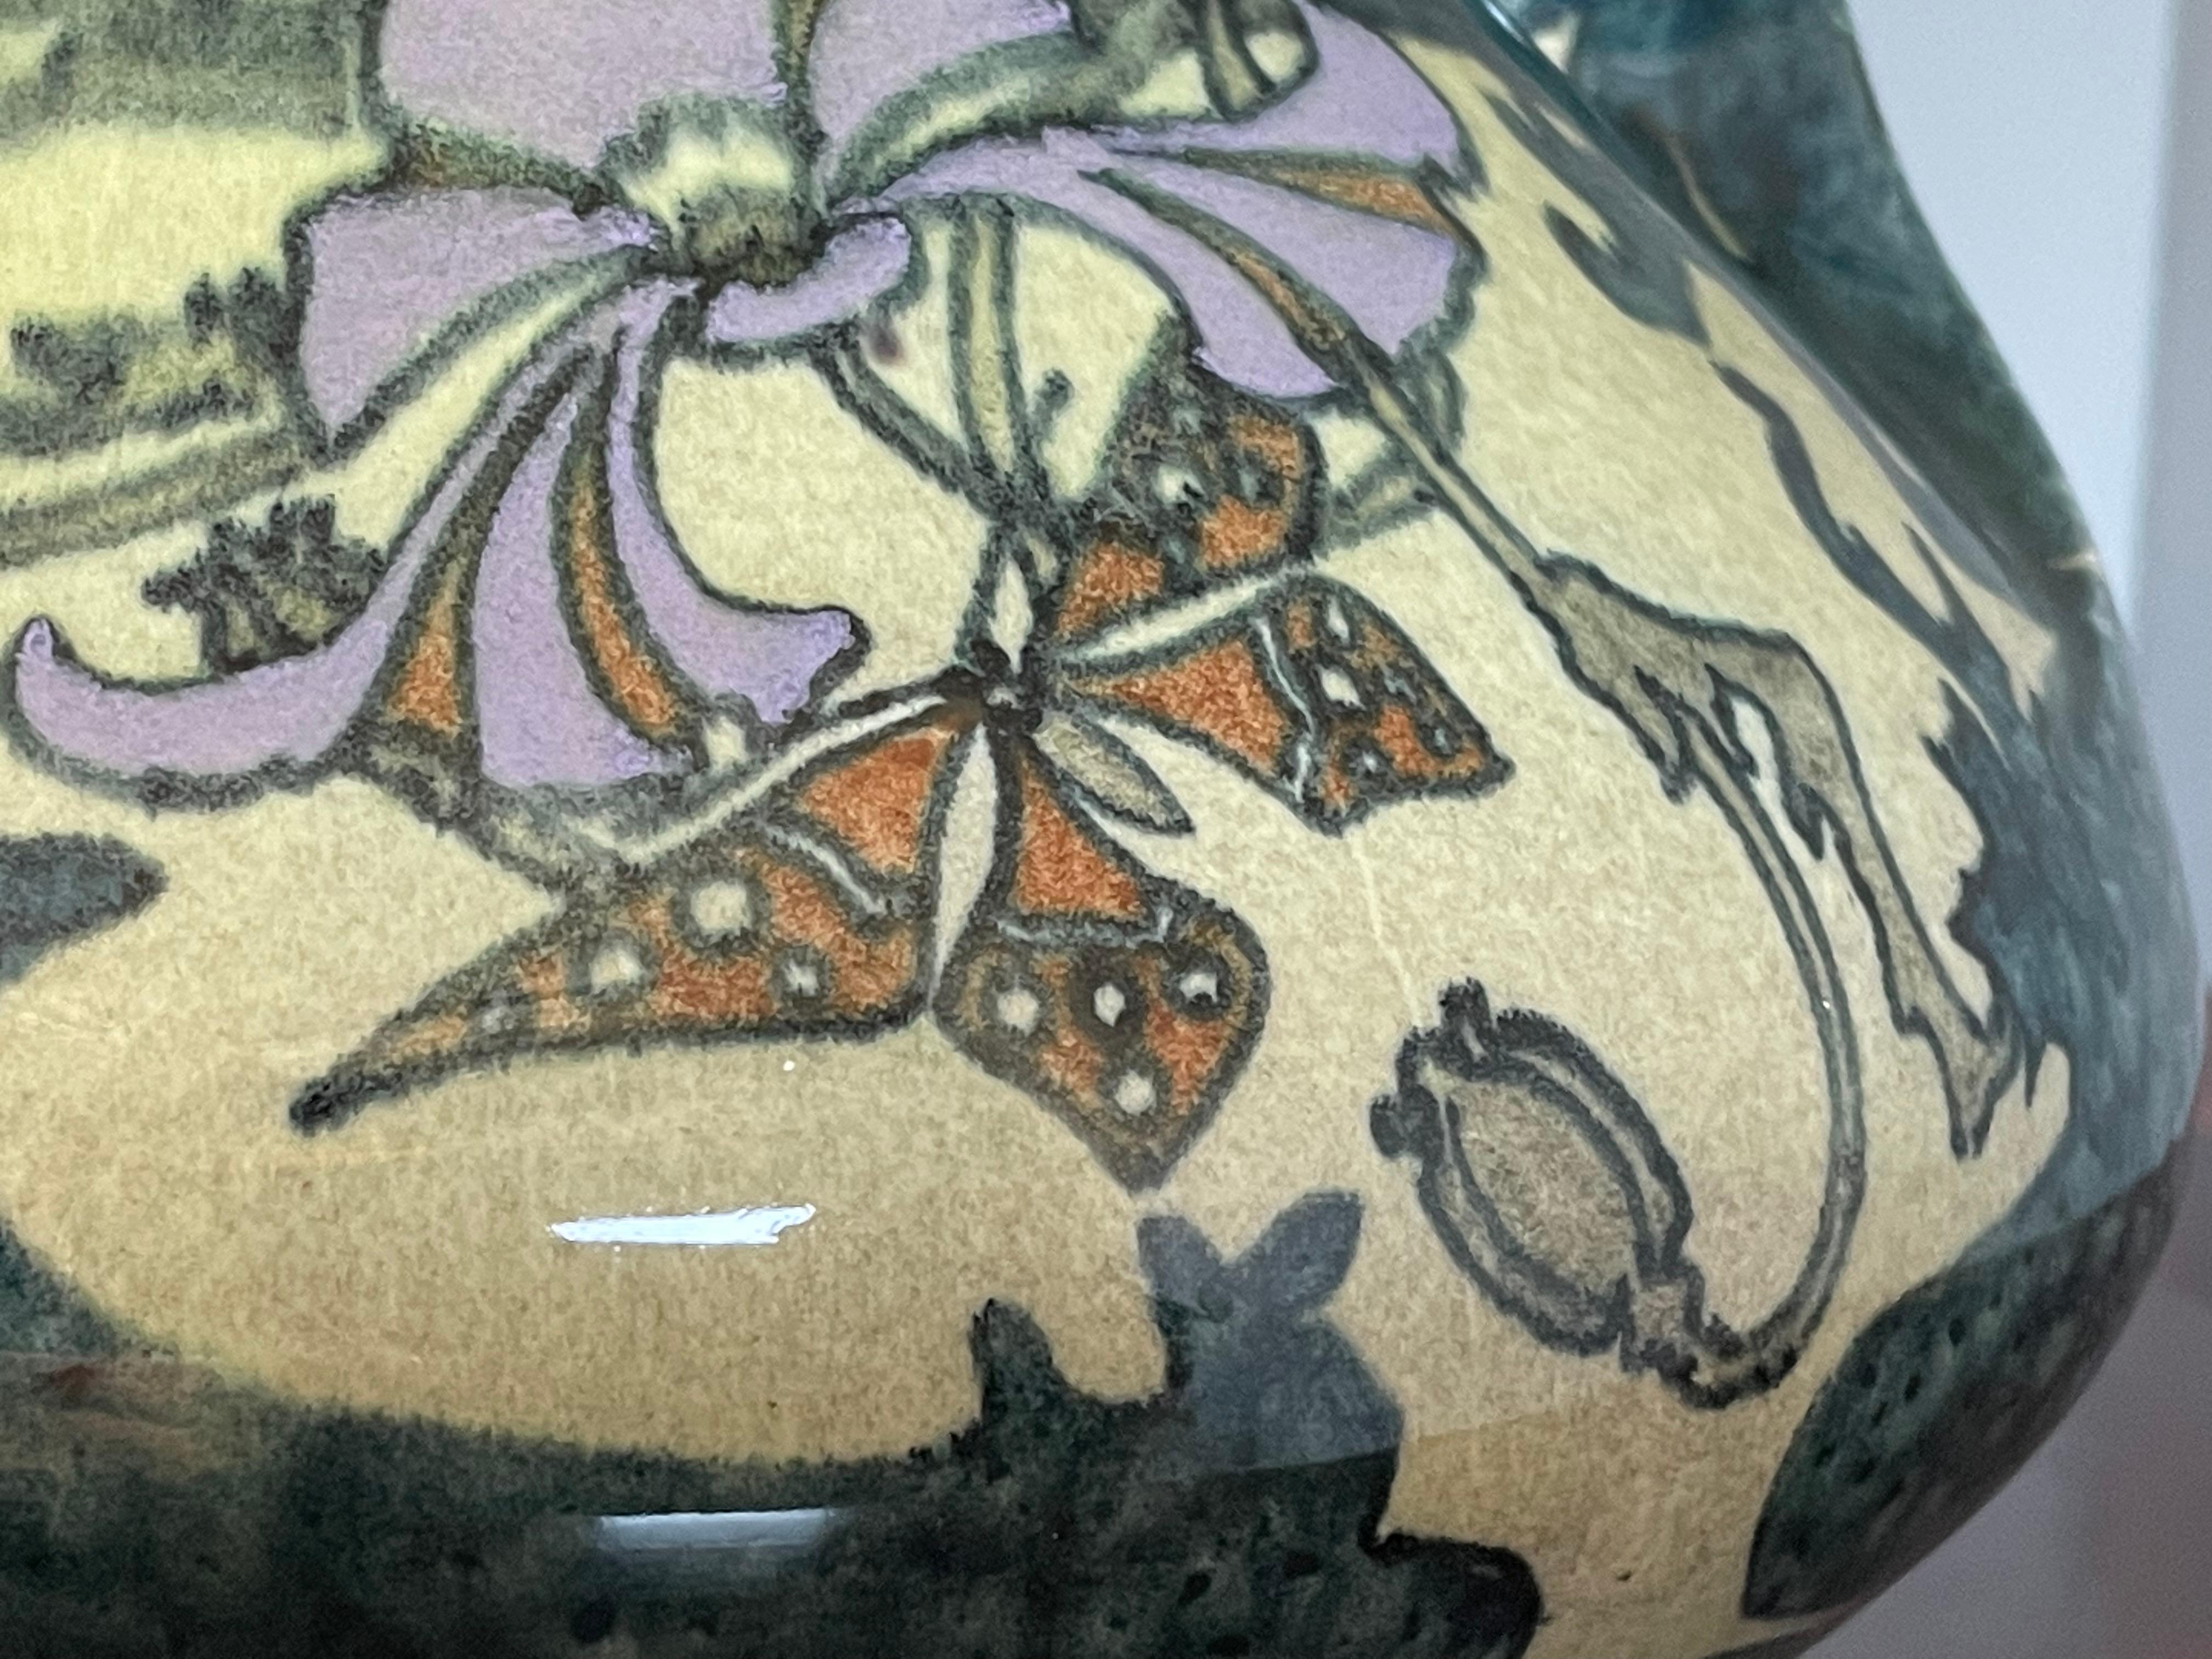 19th Century Stunning Dutch Arts and Crafts Hand Painted W. Butterflies Vase by J. Mijnlieff For Sale